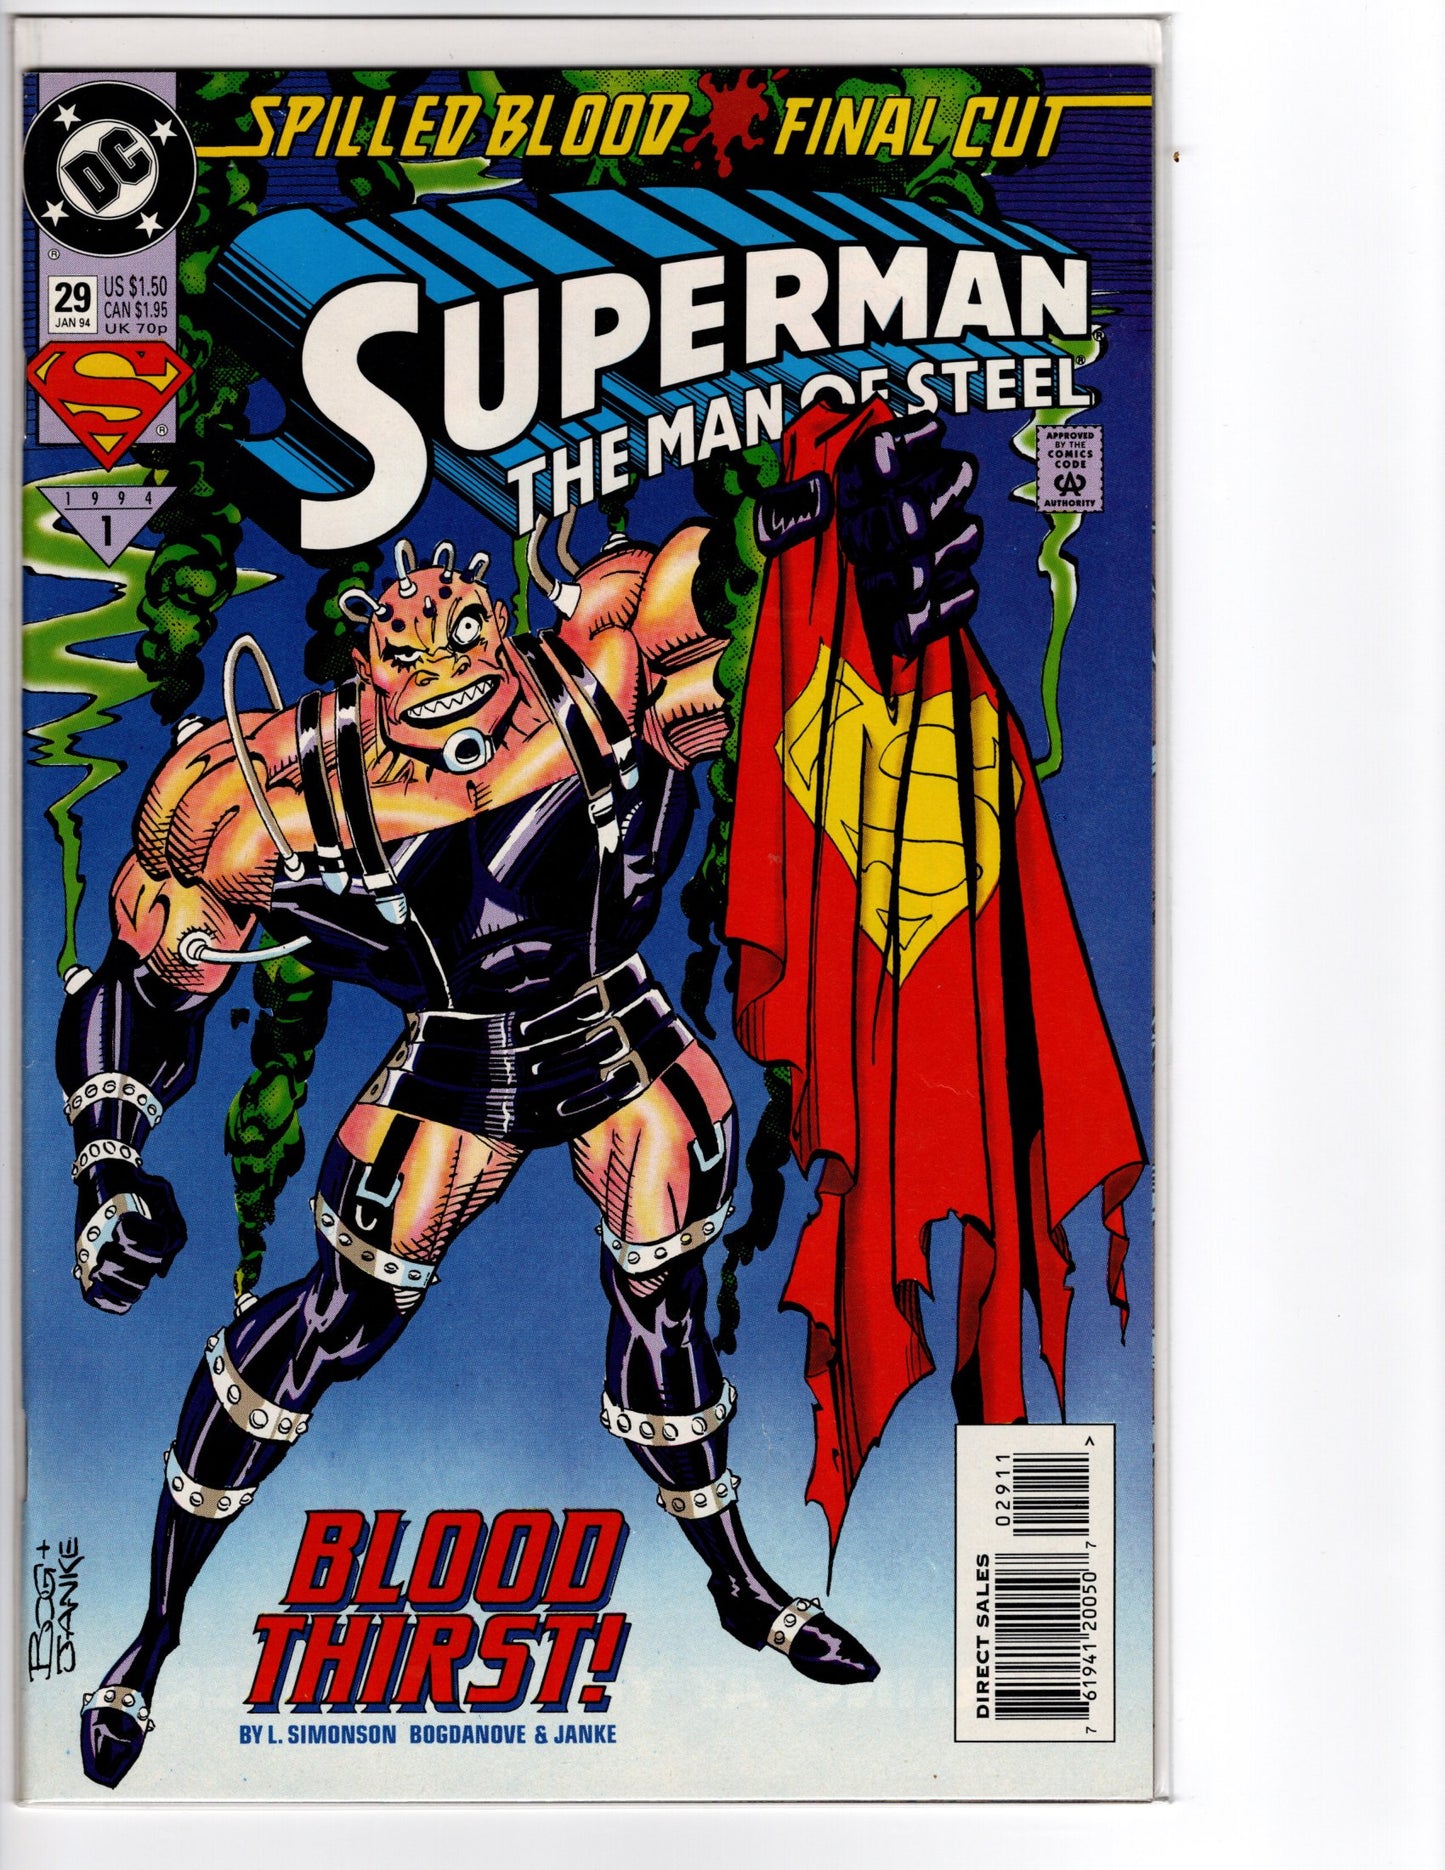 Superman - The Man of Steel No. 29